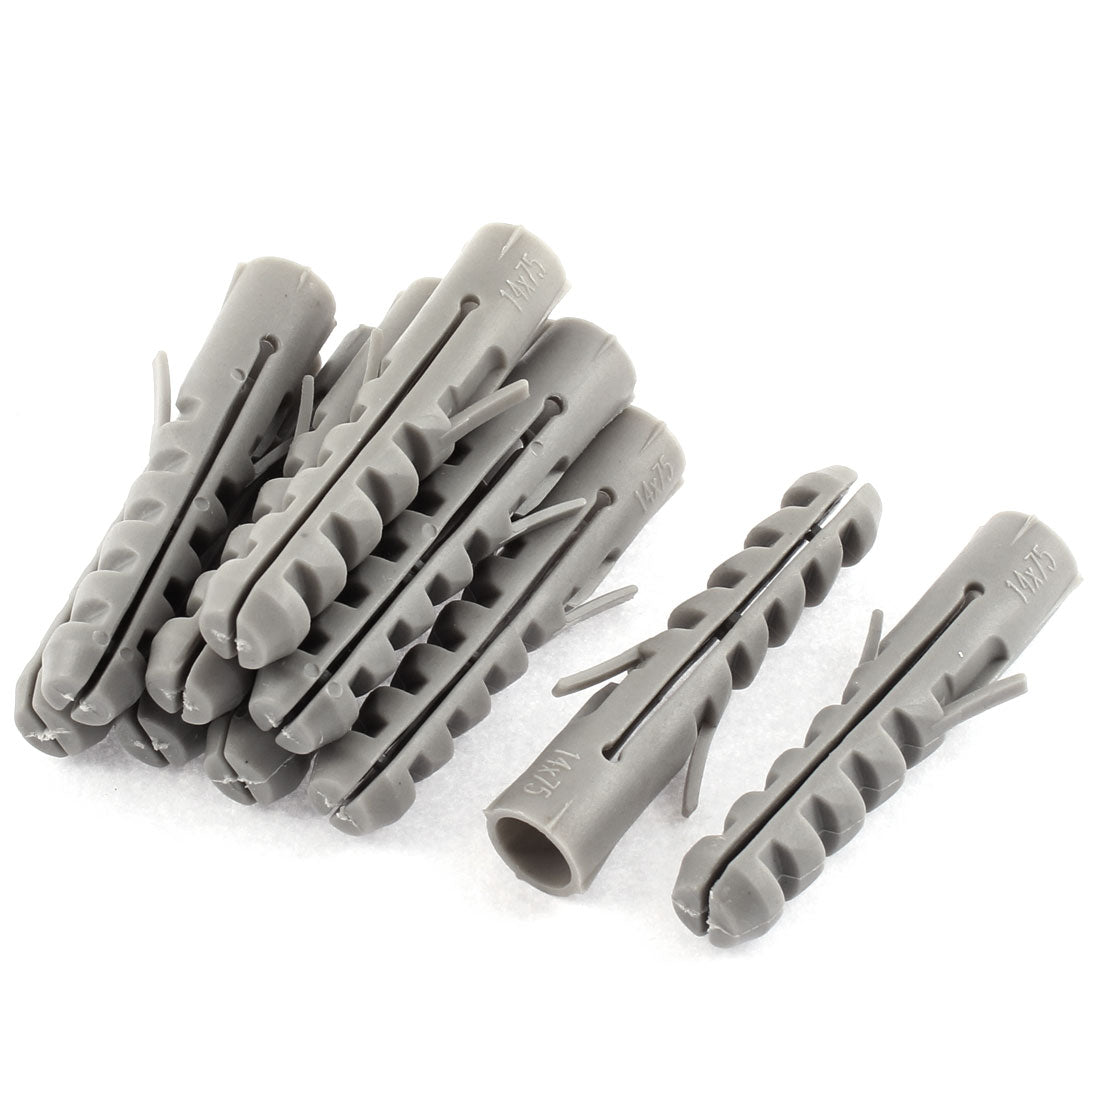 uxcell Uxcell 10Pcs 13mm x 71mm Lag Expand Tube Wall Screws Plastic Expansion Nails Connector Bolt